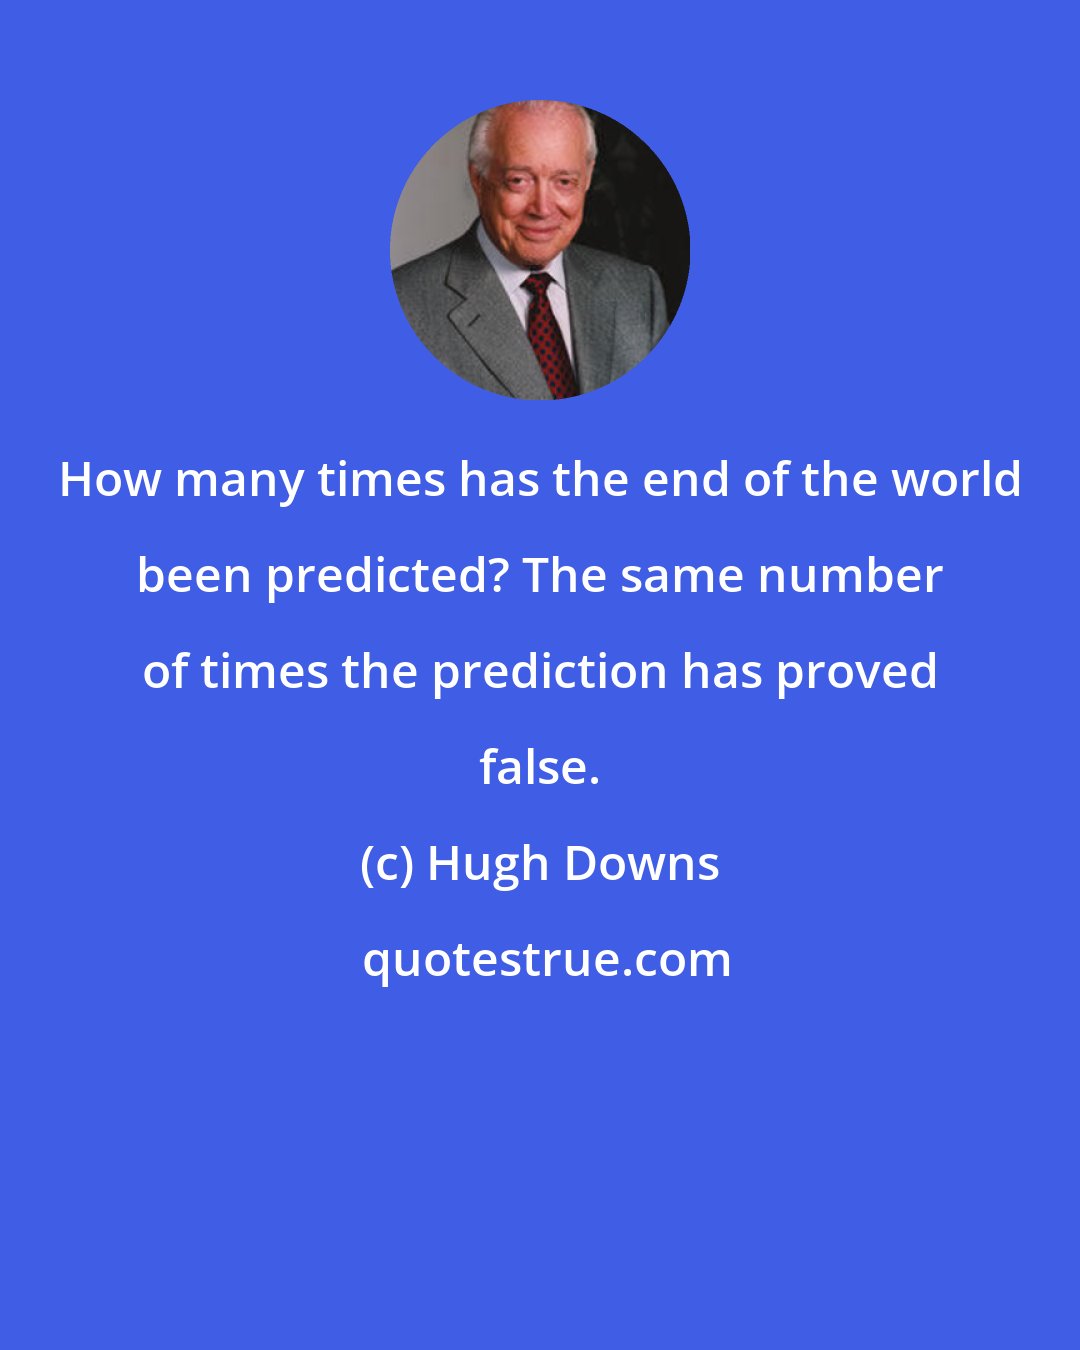 Hugh Downs: How many times has the end of the world been predicted? The same number of times the prediction has proved false.